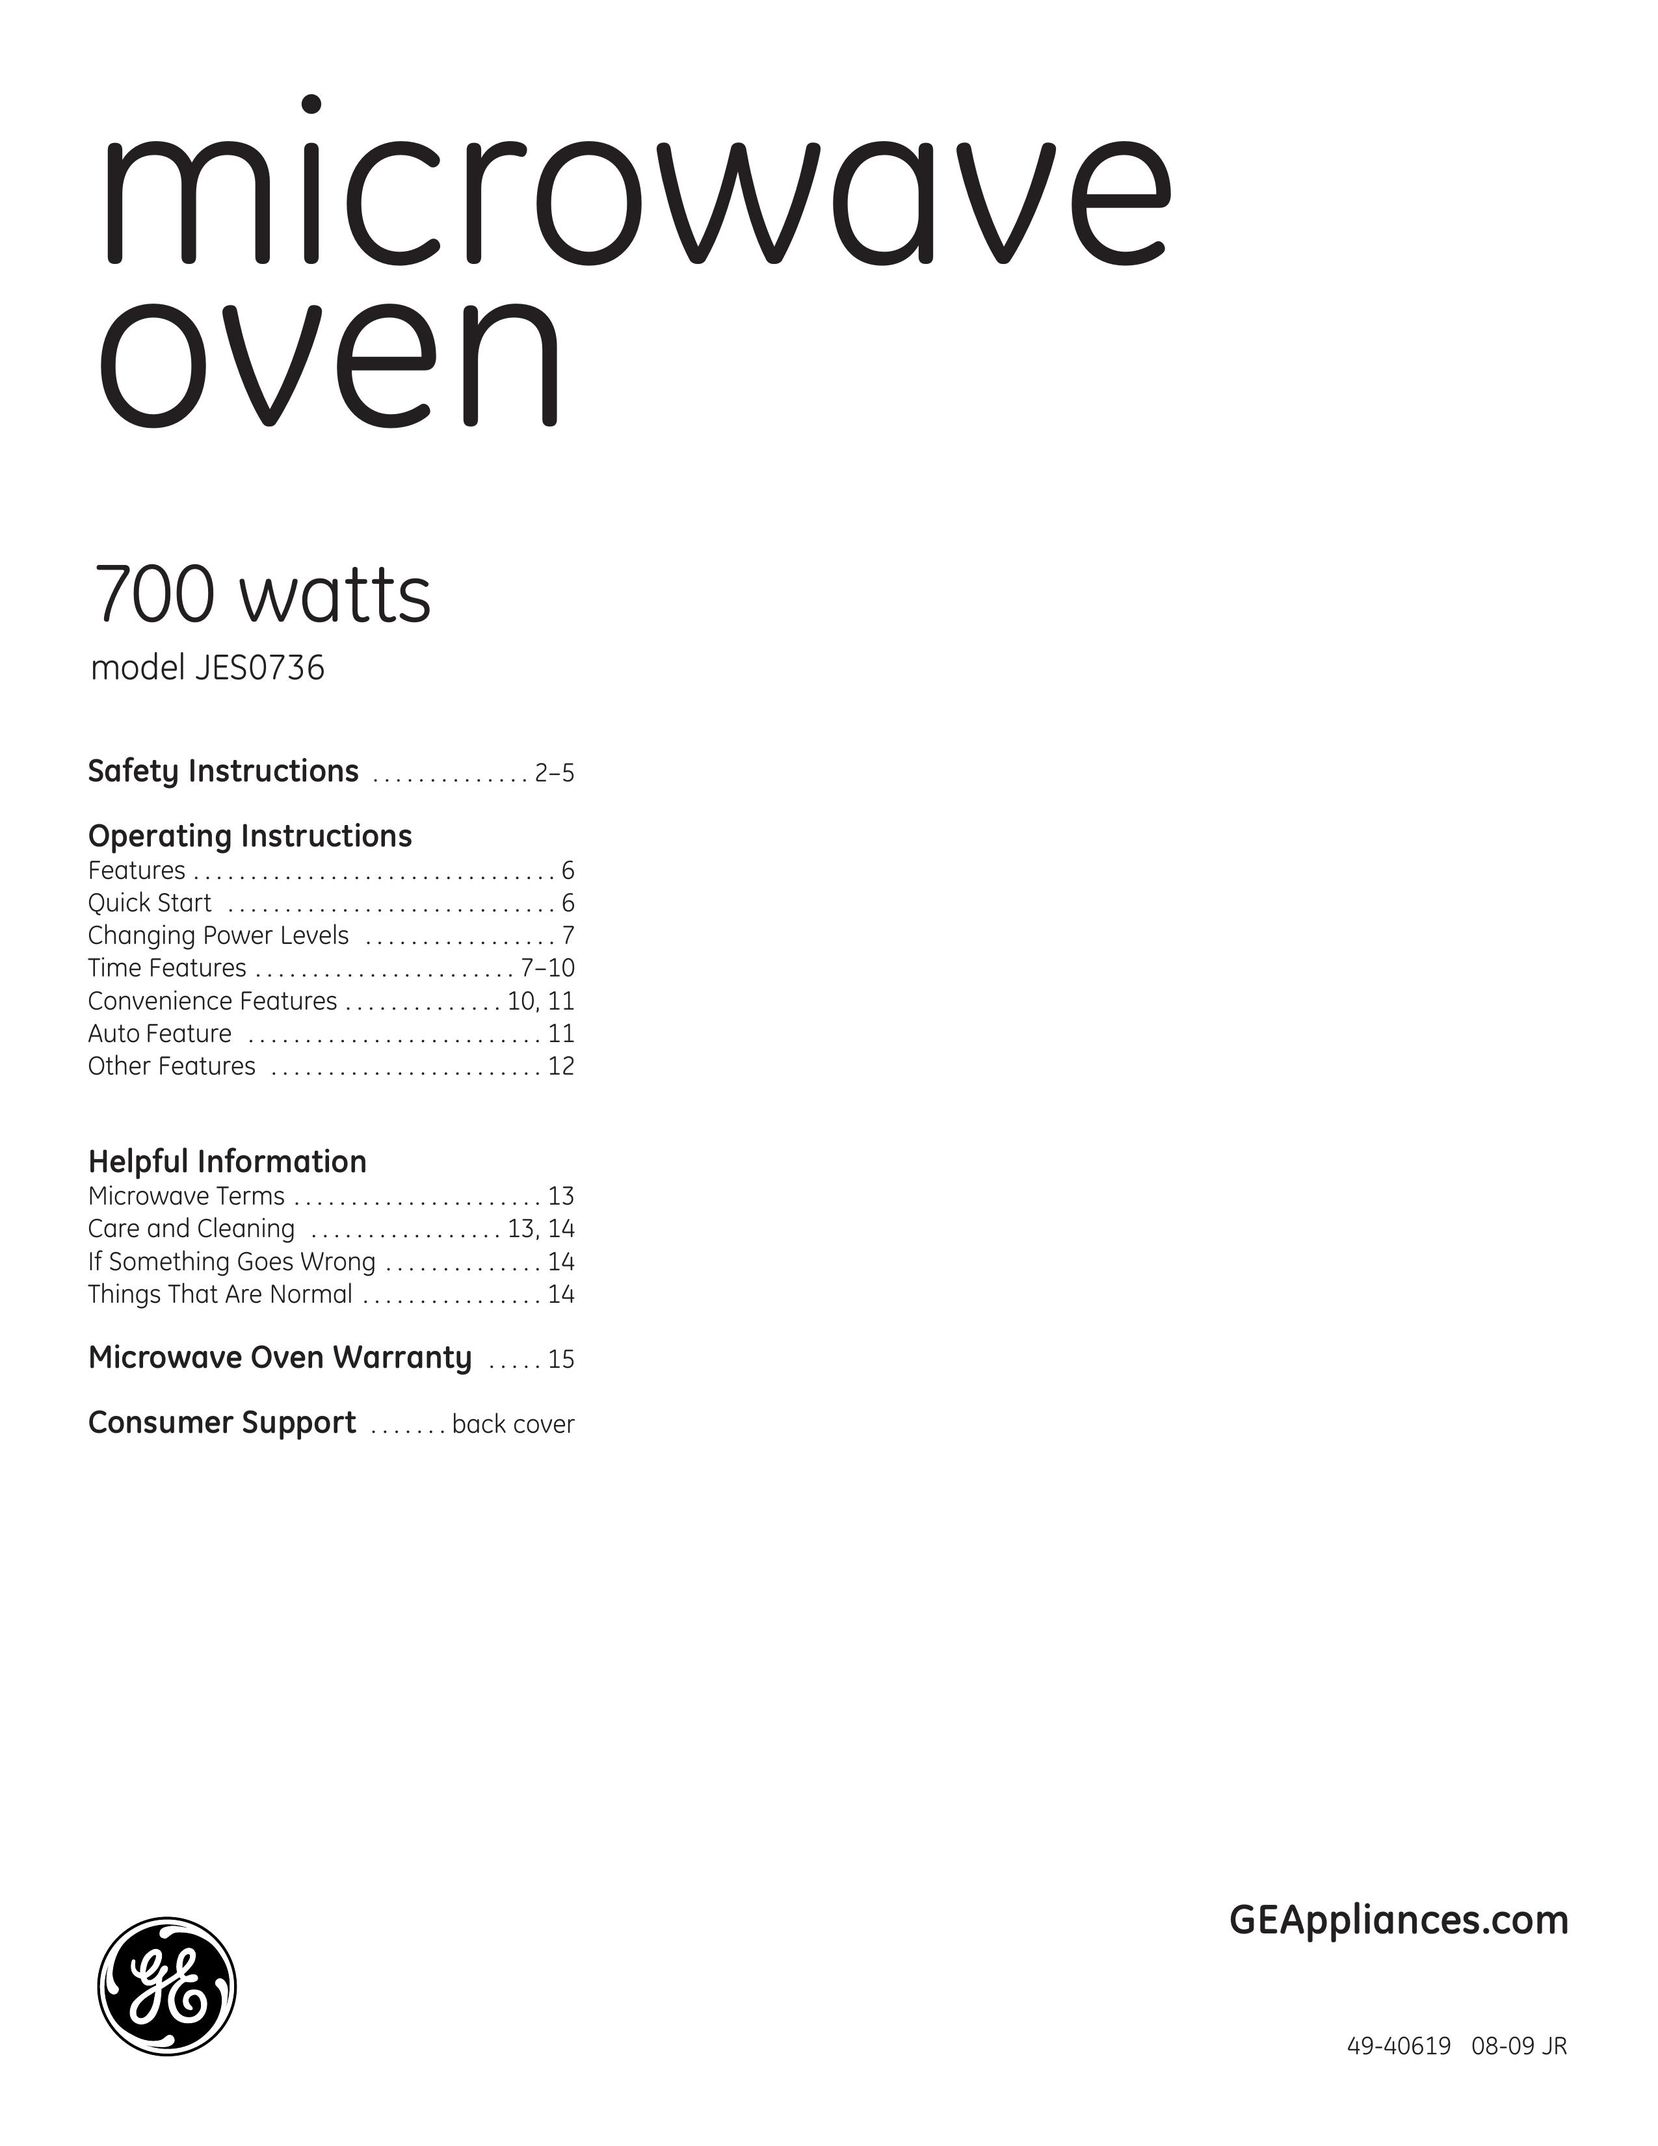 GE 9500D Microwave Oven User Manual